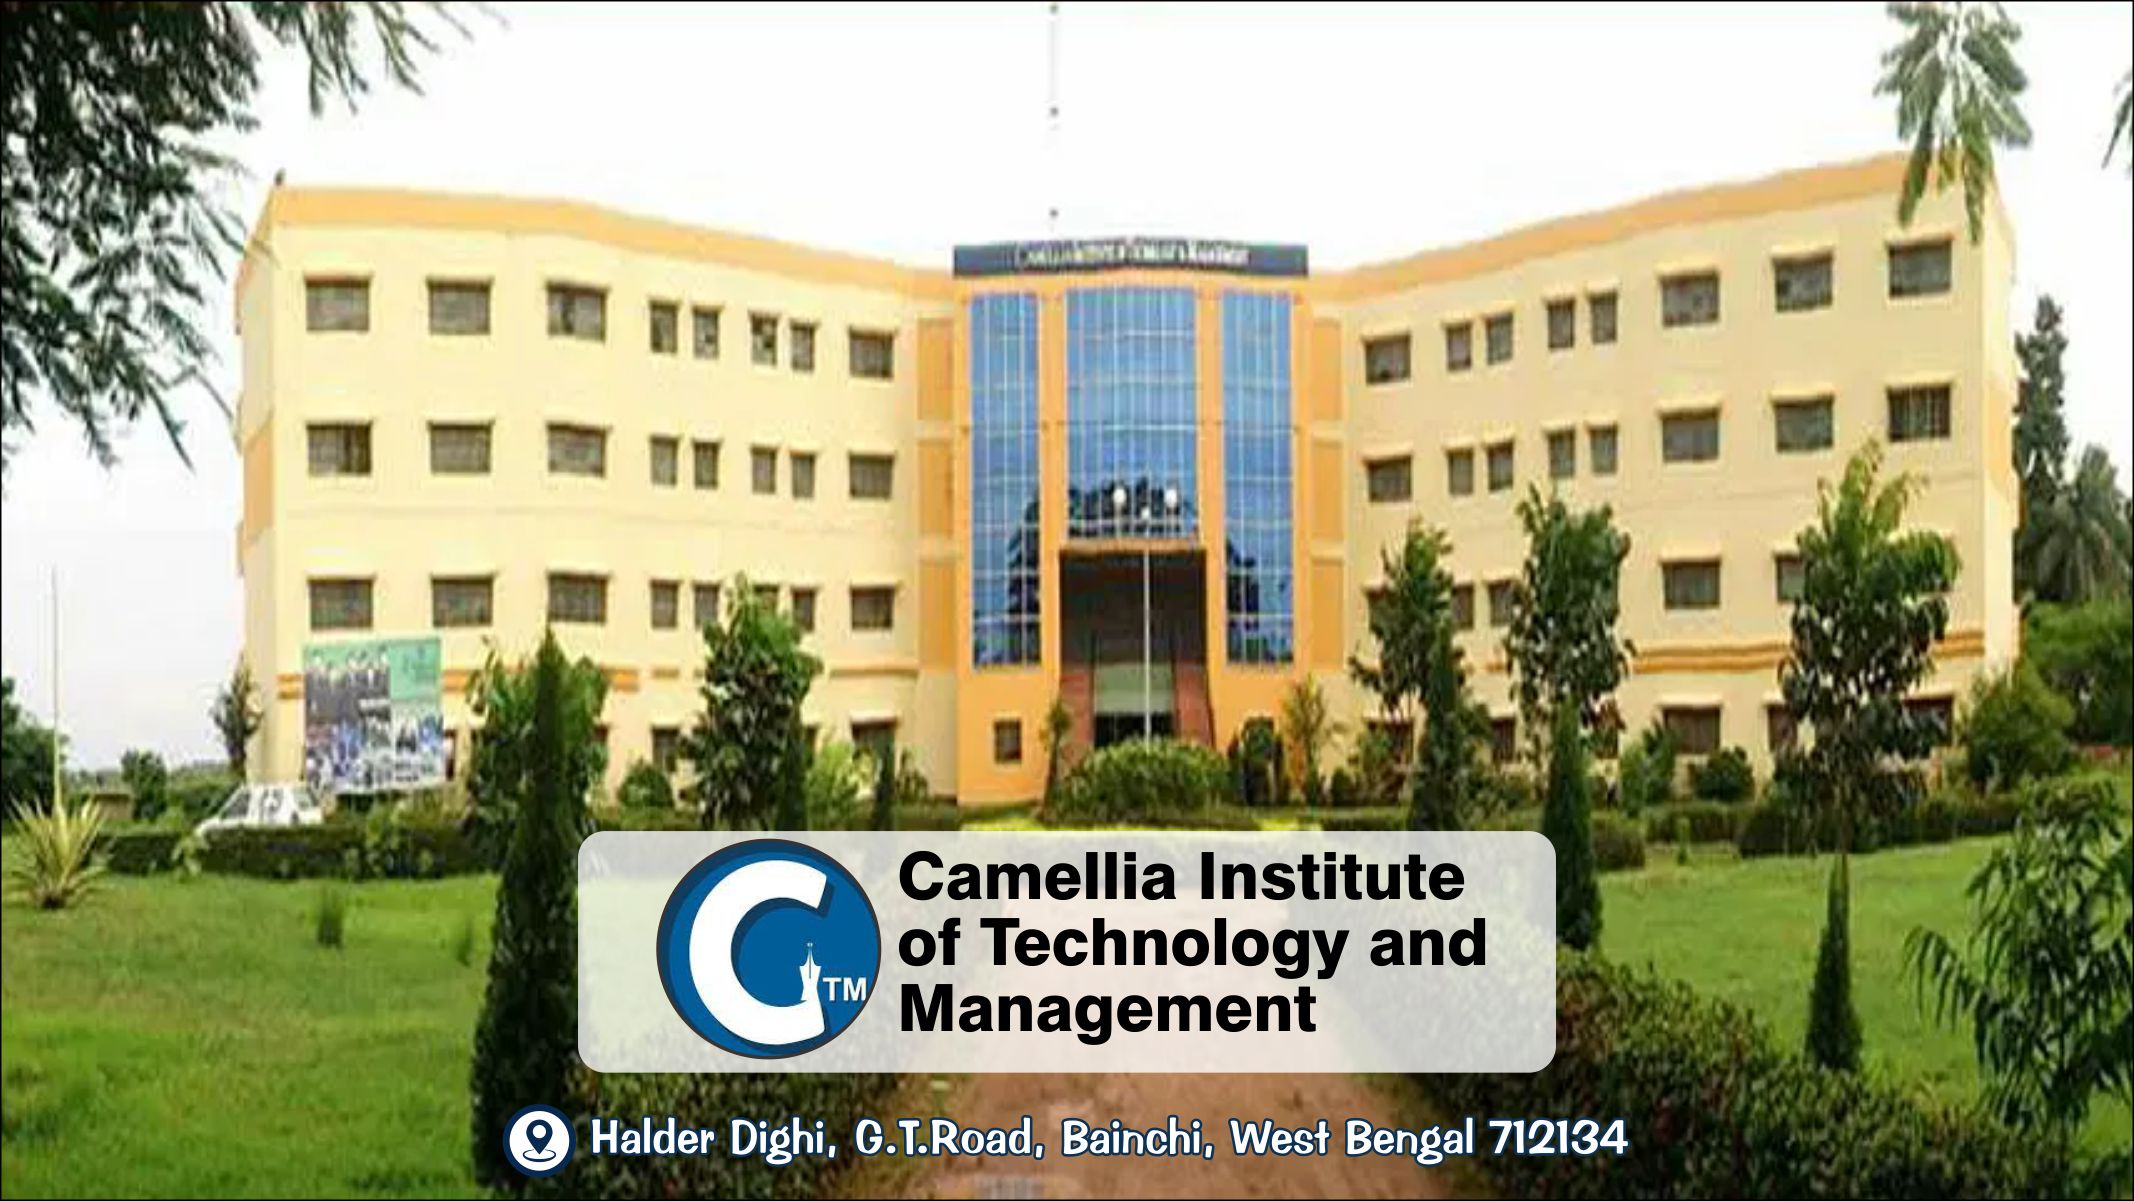 Out Side View of Camellia Institute of Technology and Management - CITM